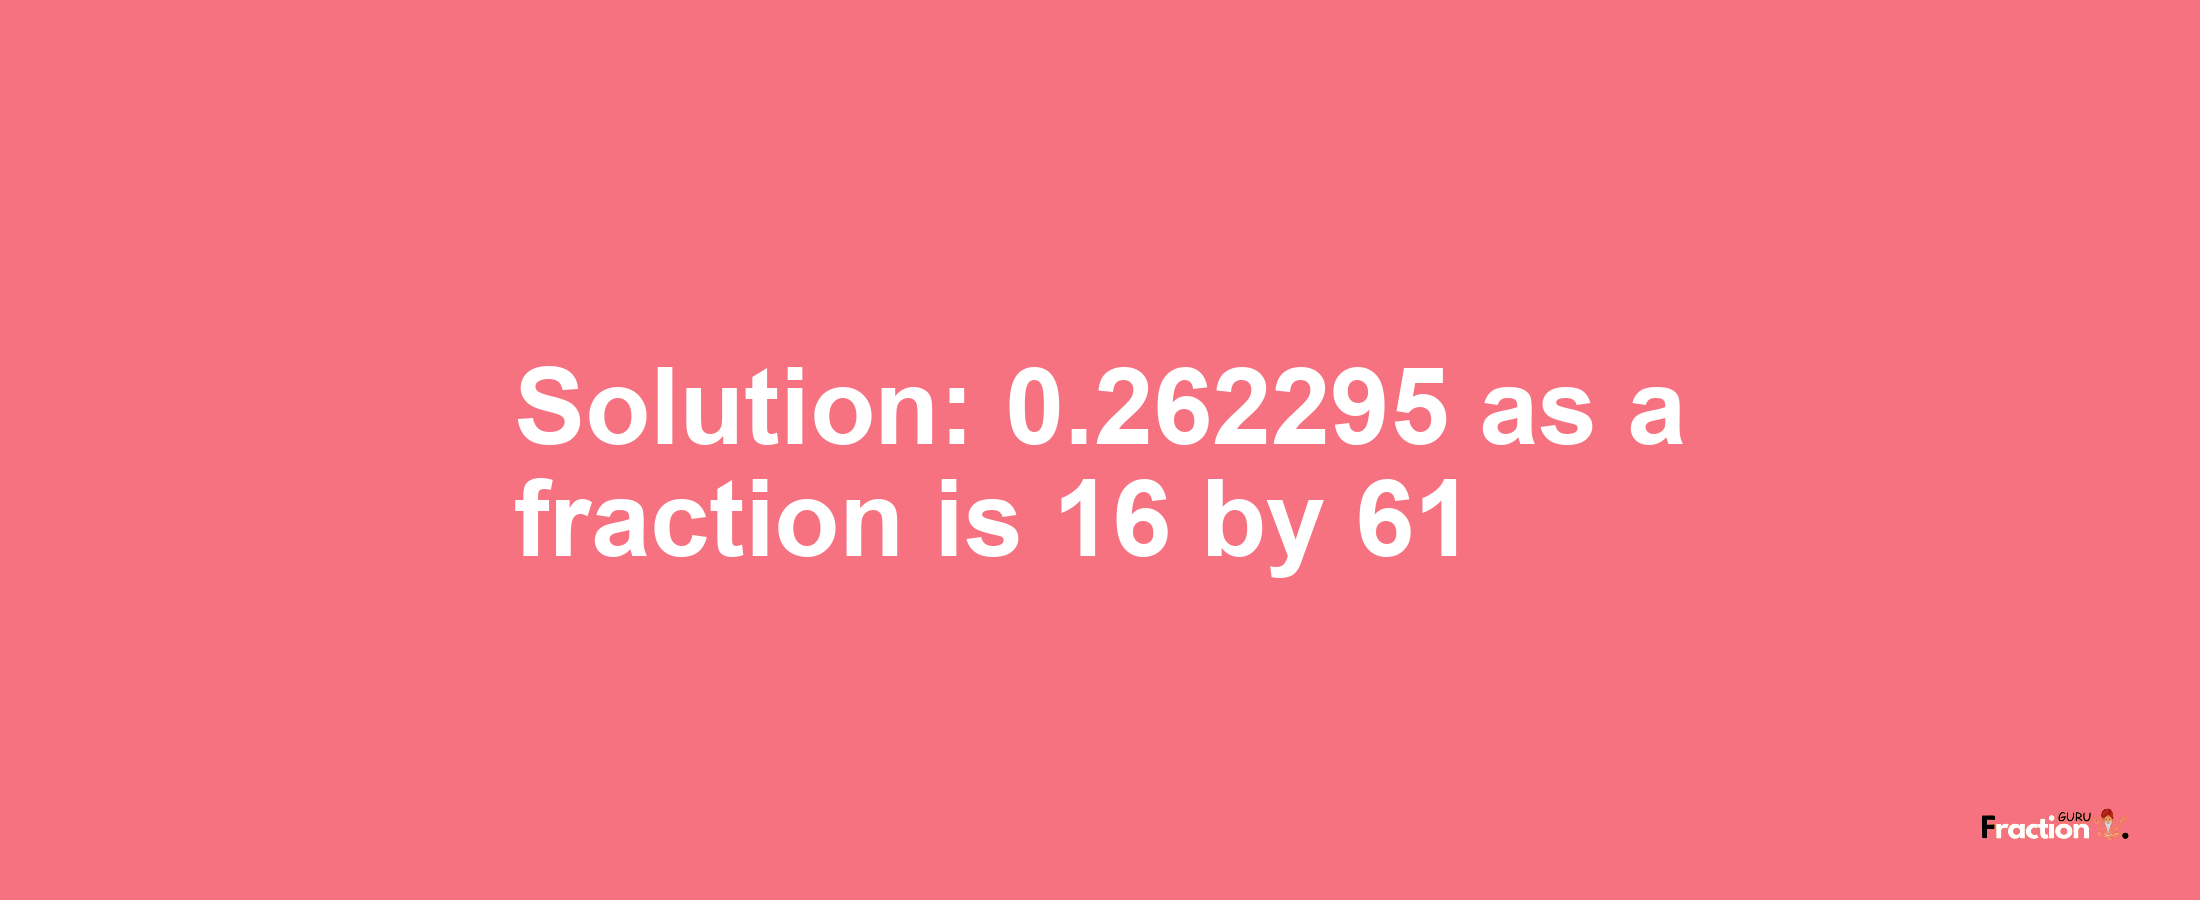 Solution:0.262295 as a fraction is 16/61